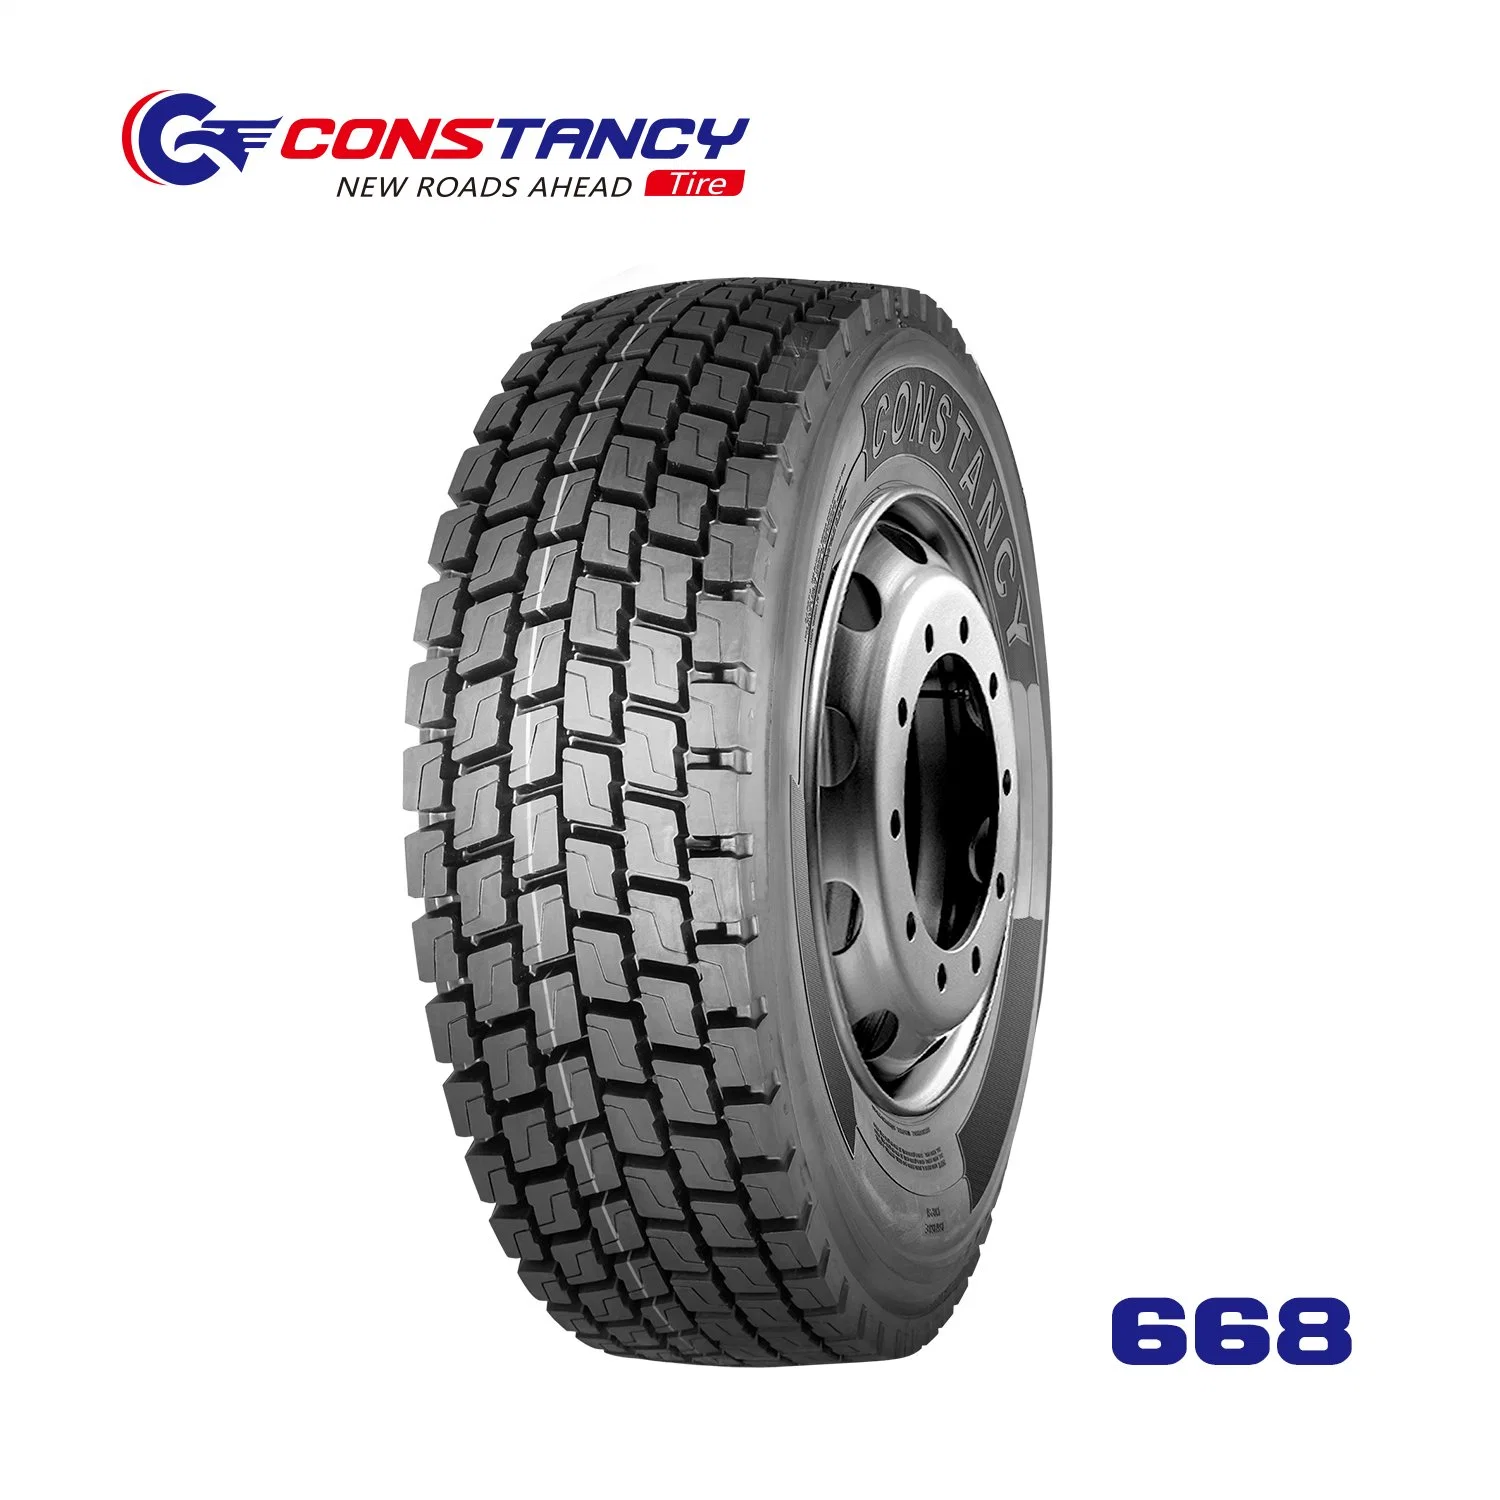 Constancy Carleo Brand China Manufacturer Truck Tire Tire 12r22.5